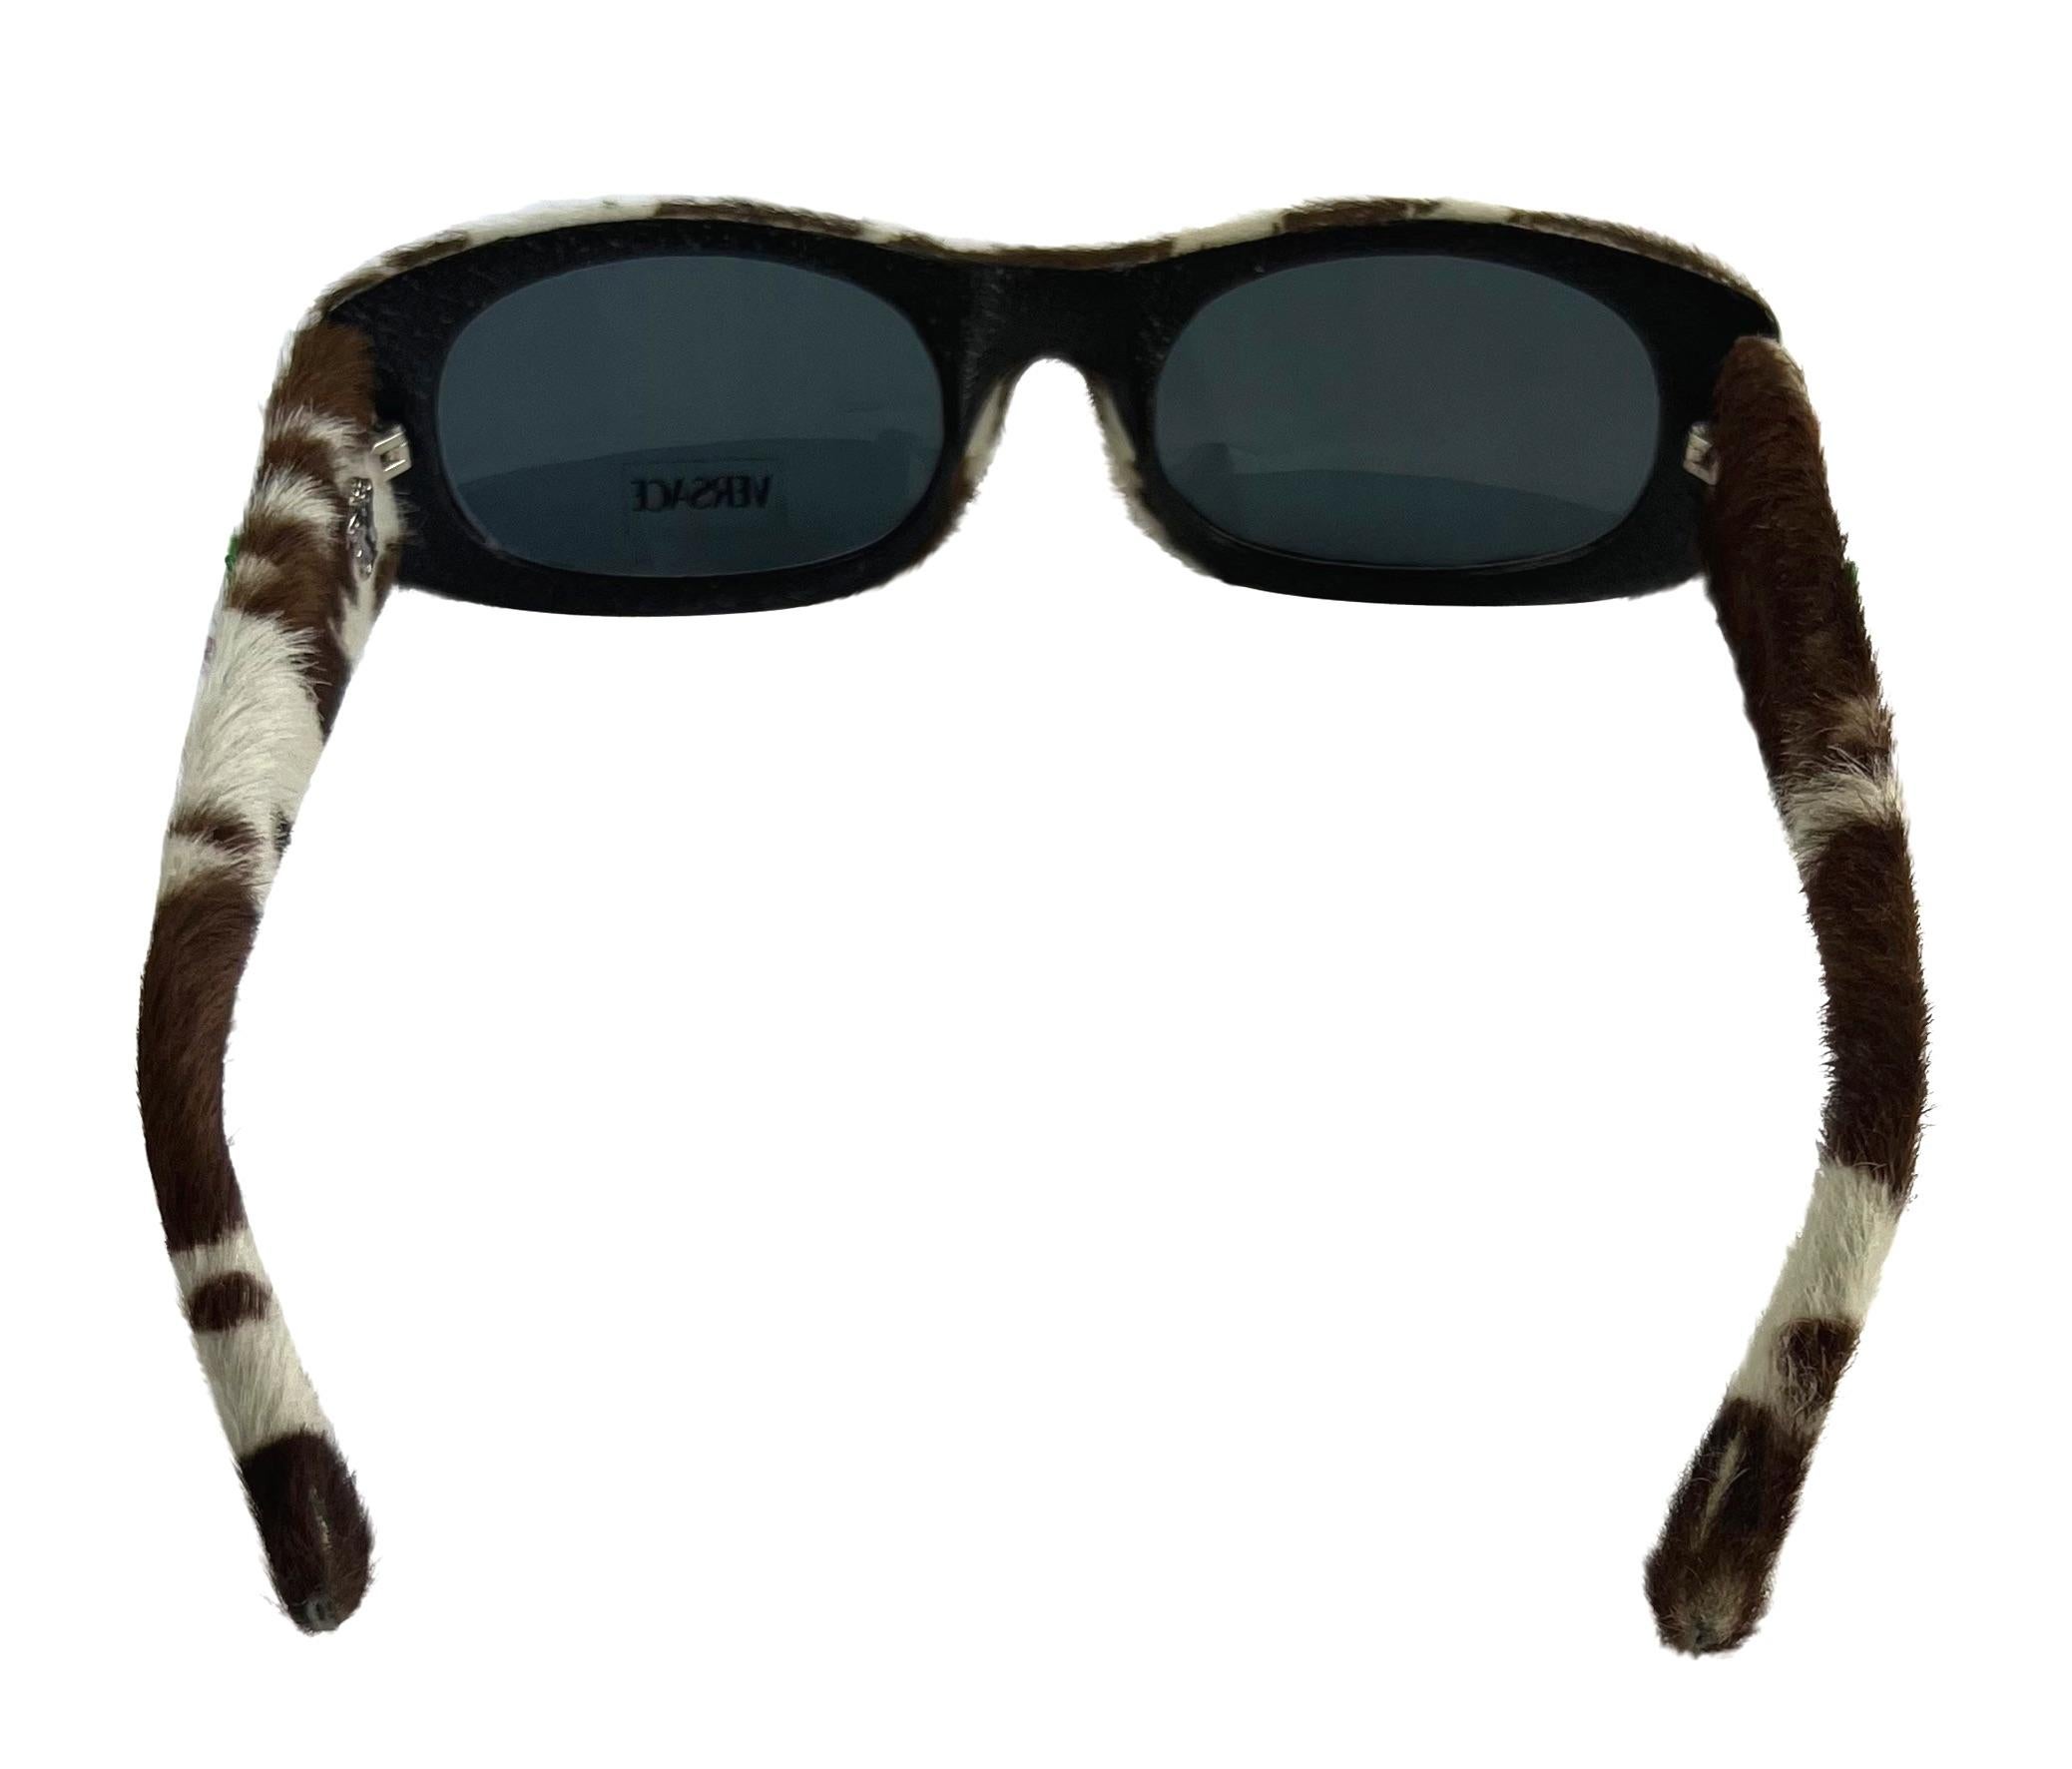 Presenting a fabulous pair of cow-print pony hair Versace sunglasses, designed by Donatella Versace. From the Spring/Summer 1999 collection, these sunglasses are covered in dotted pony hair and feature purple and green pom-pom details at the